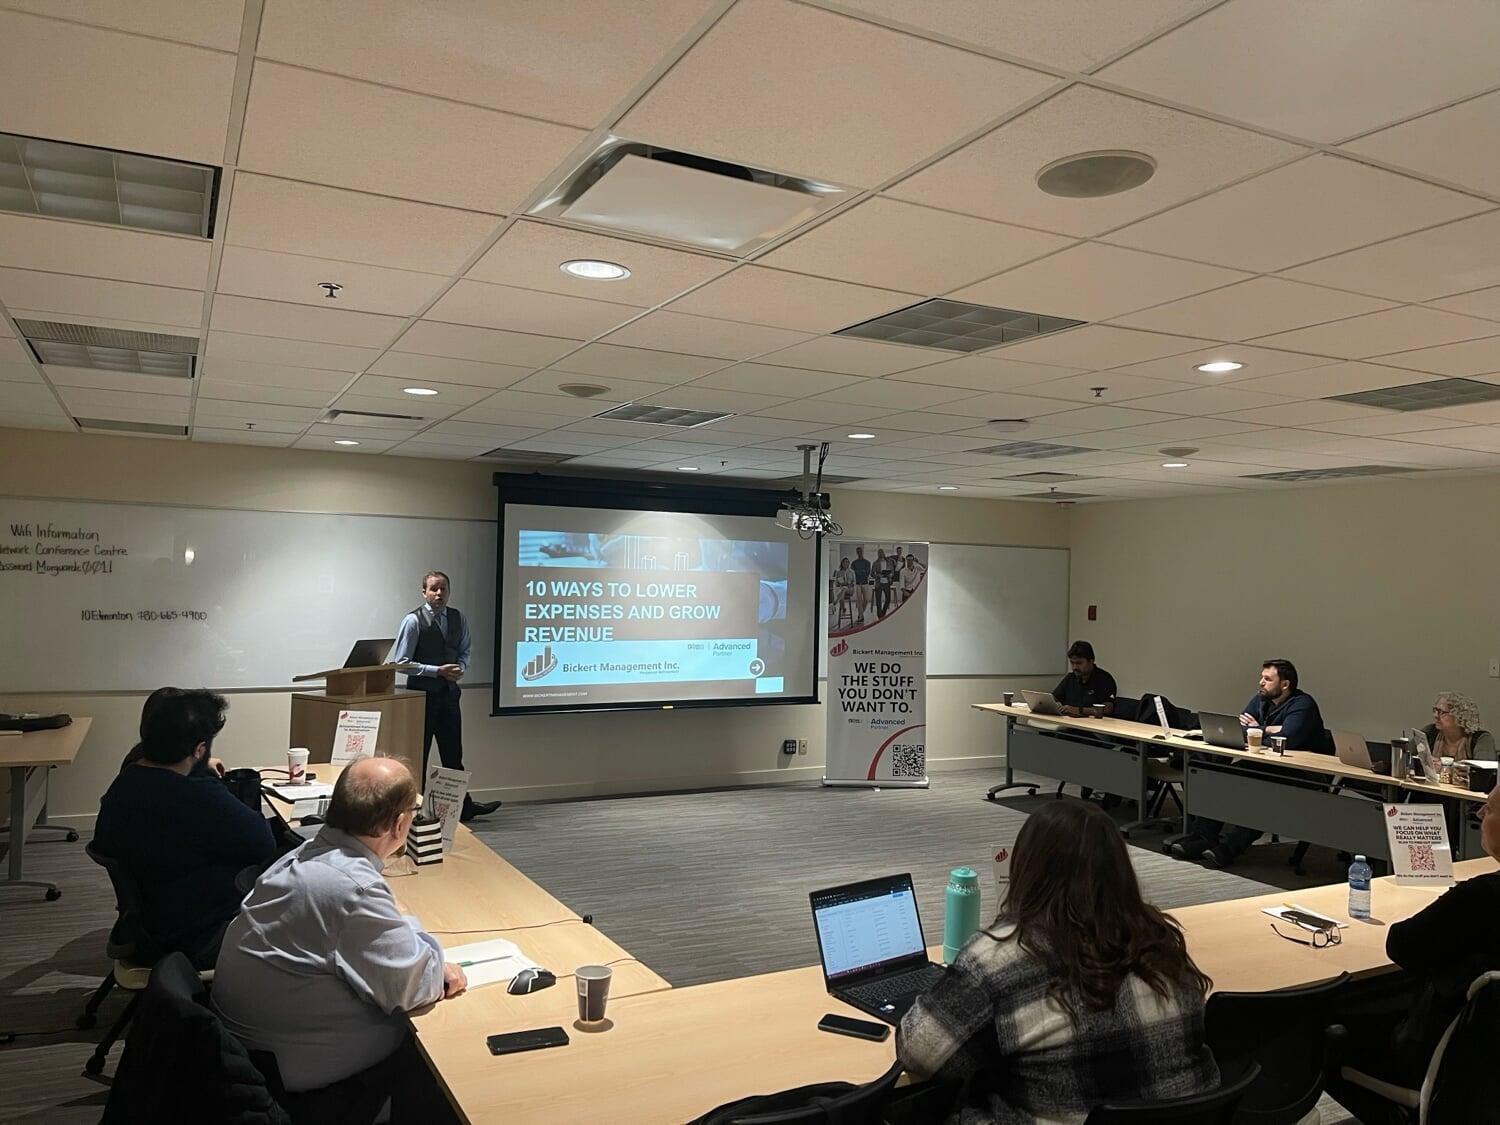 BMI attended the Zoho user group in Edmonton